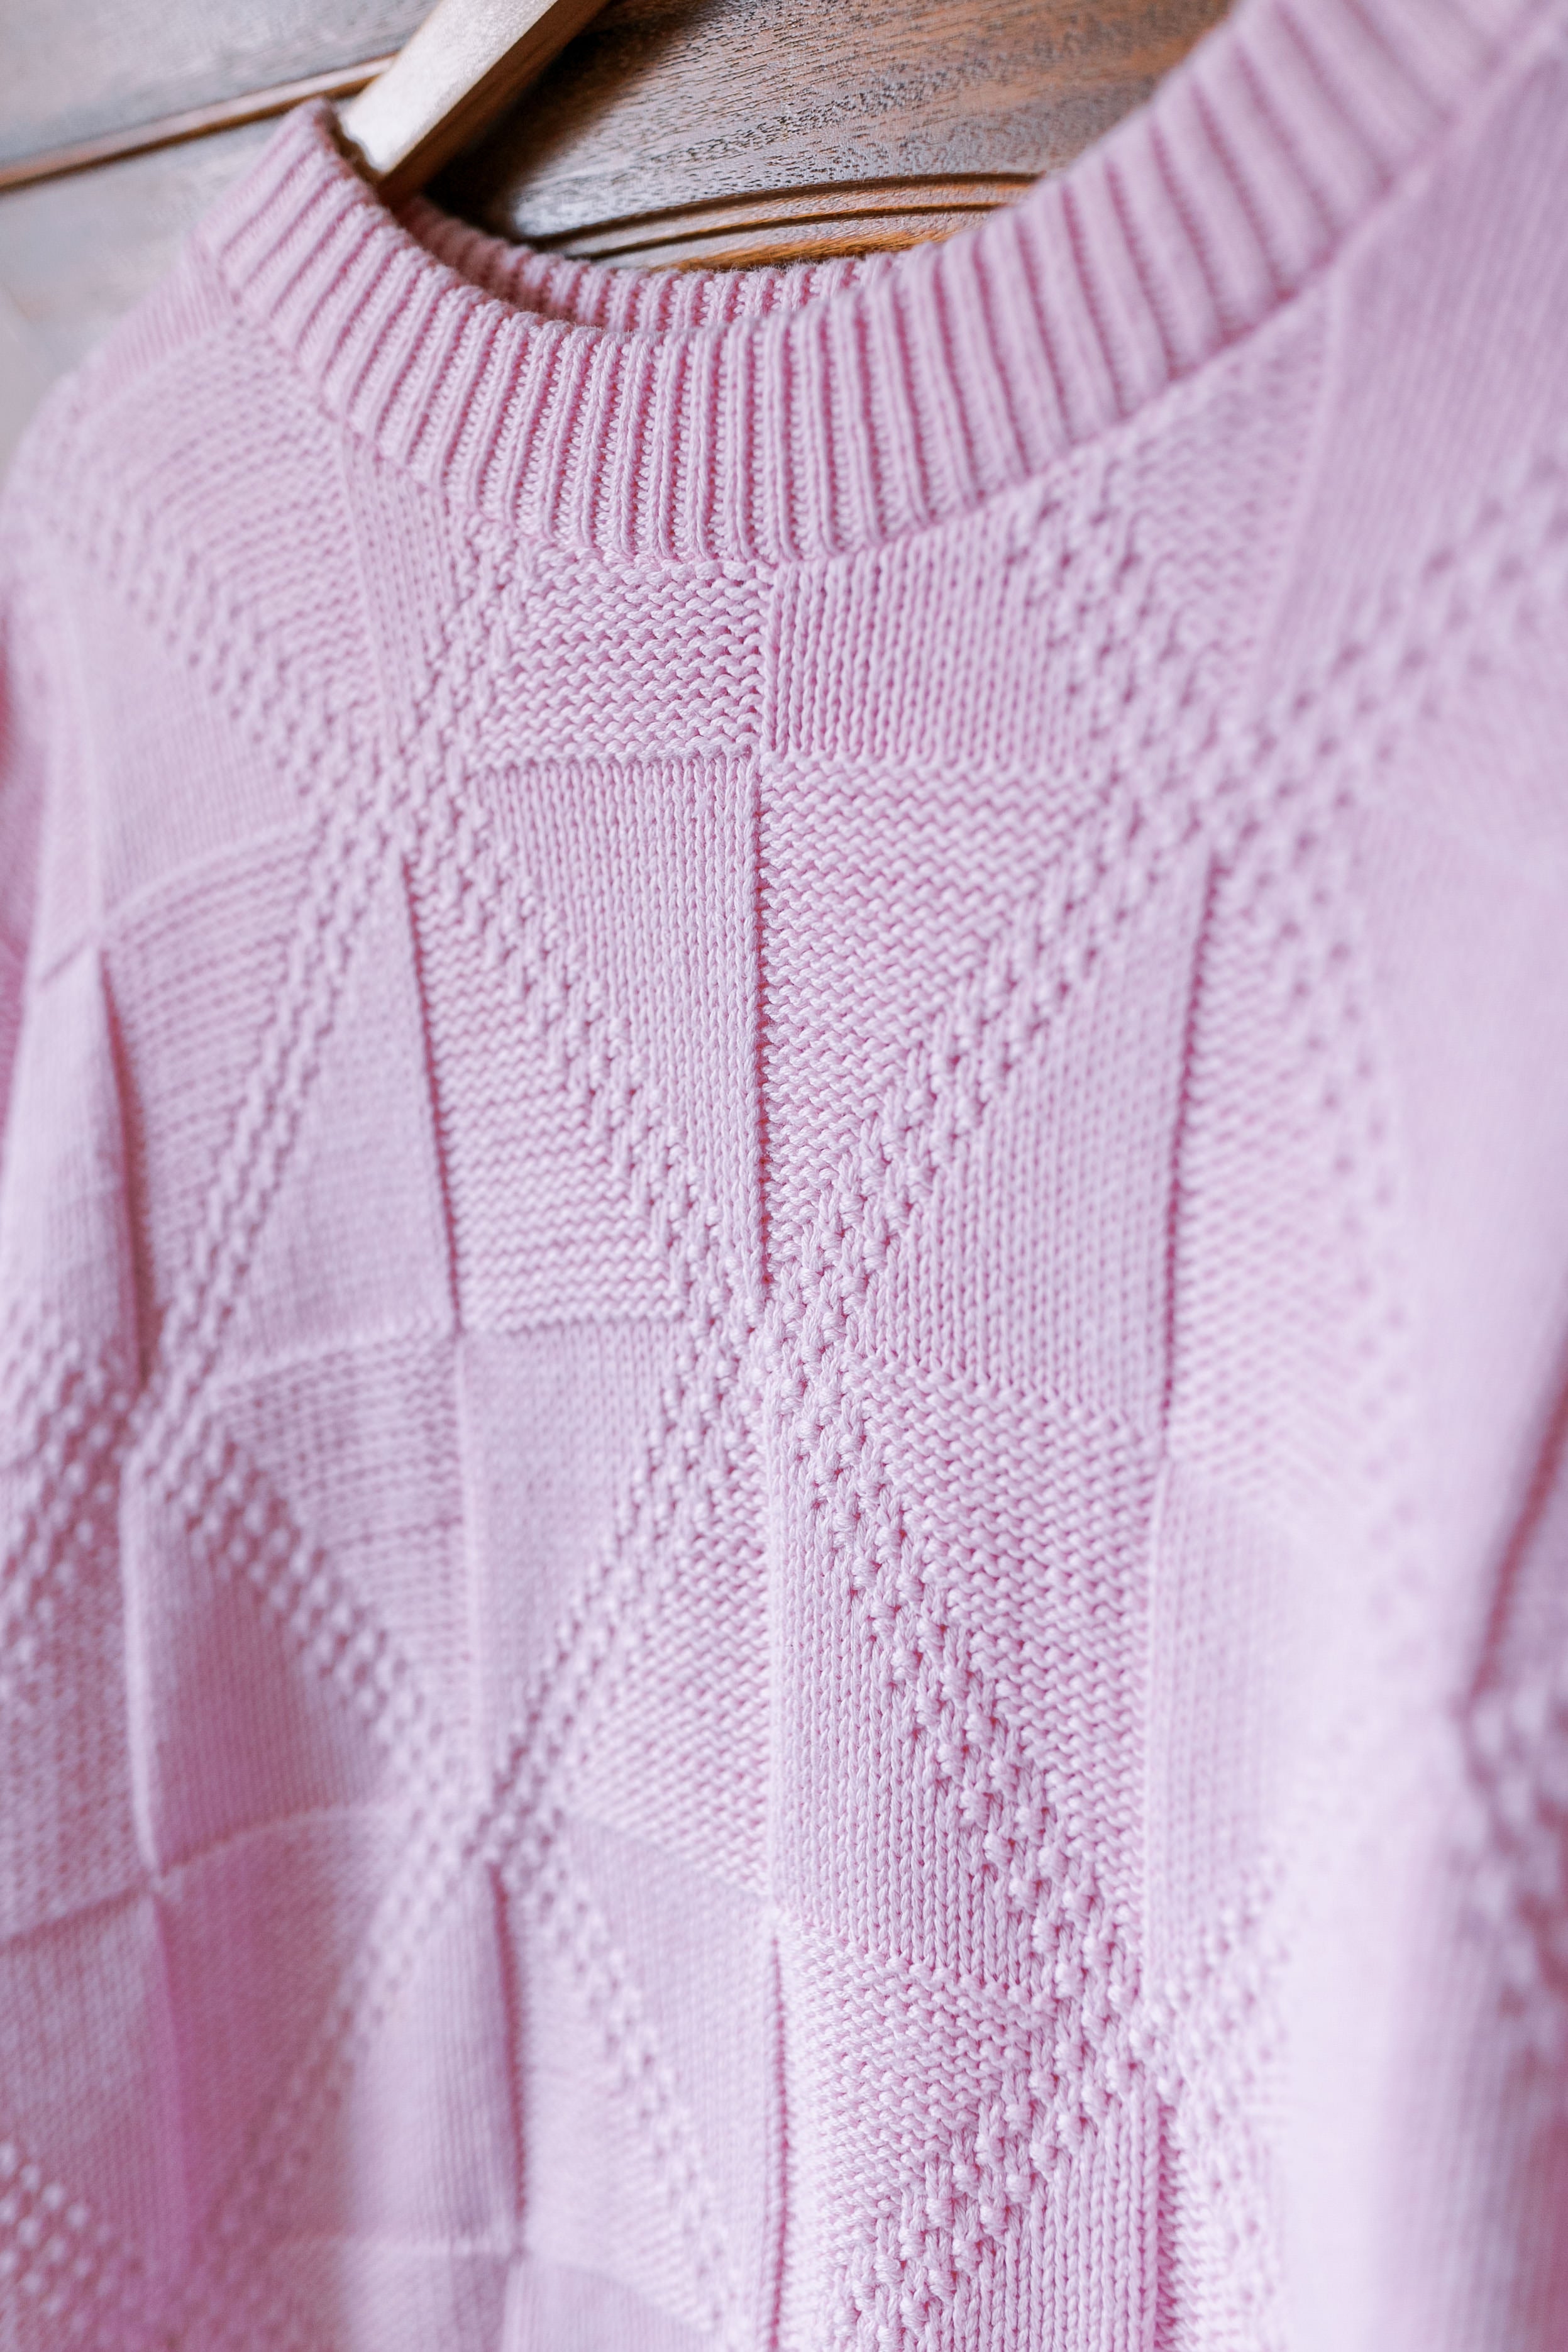 Made in the USA Vintage Pink Knitted Pullover